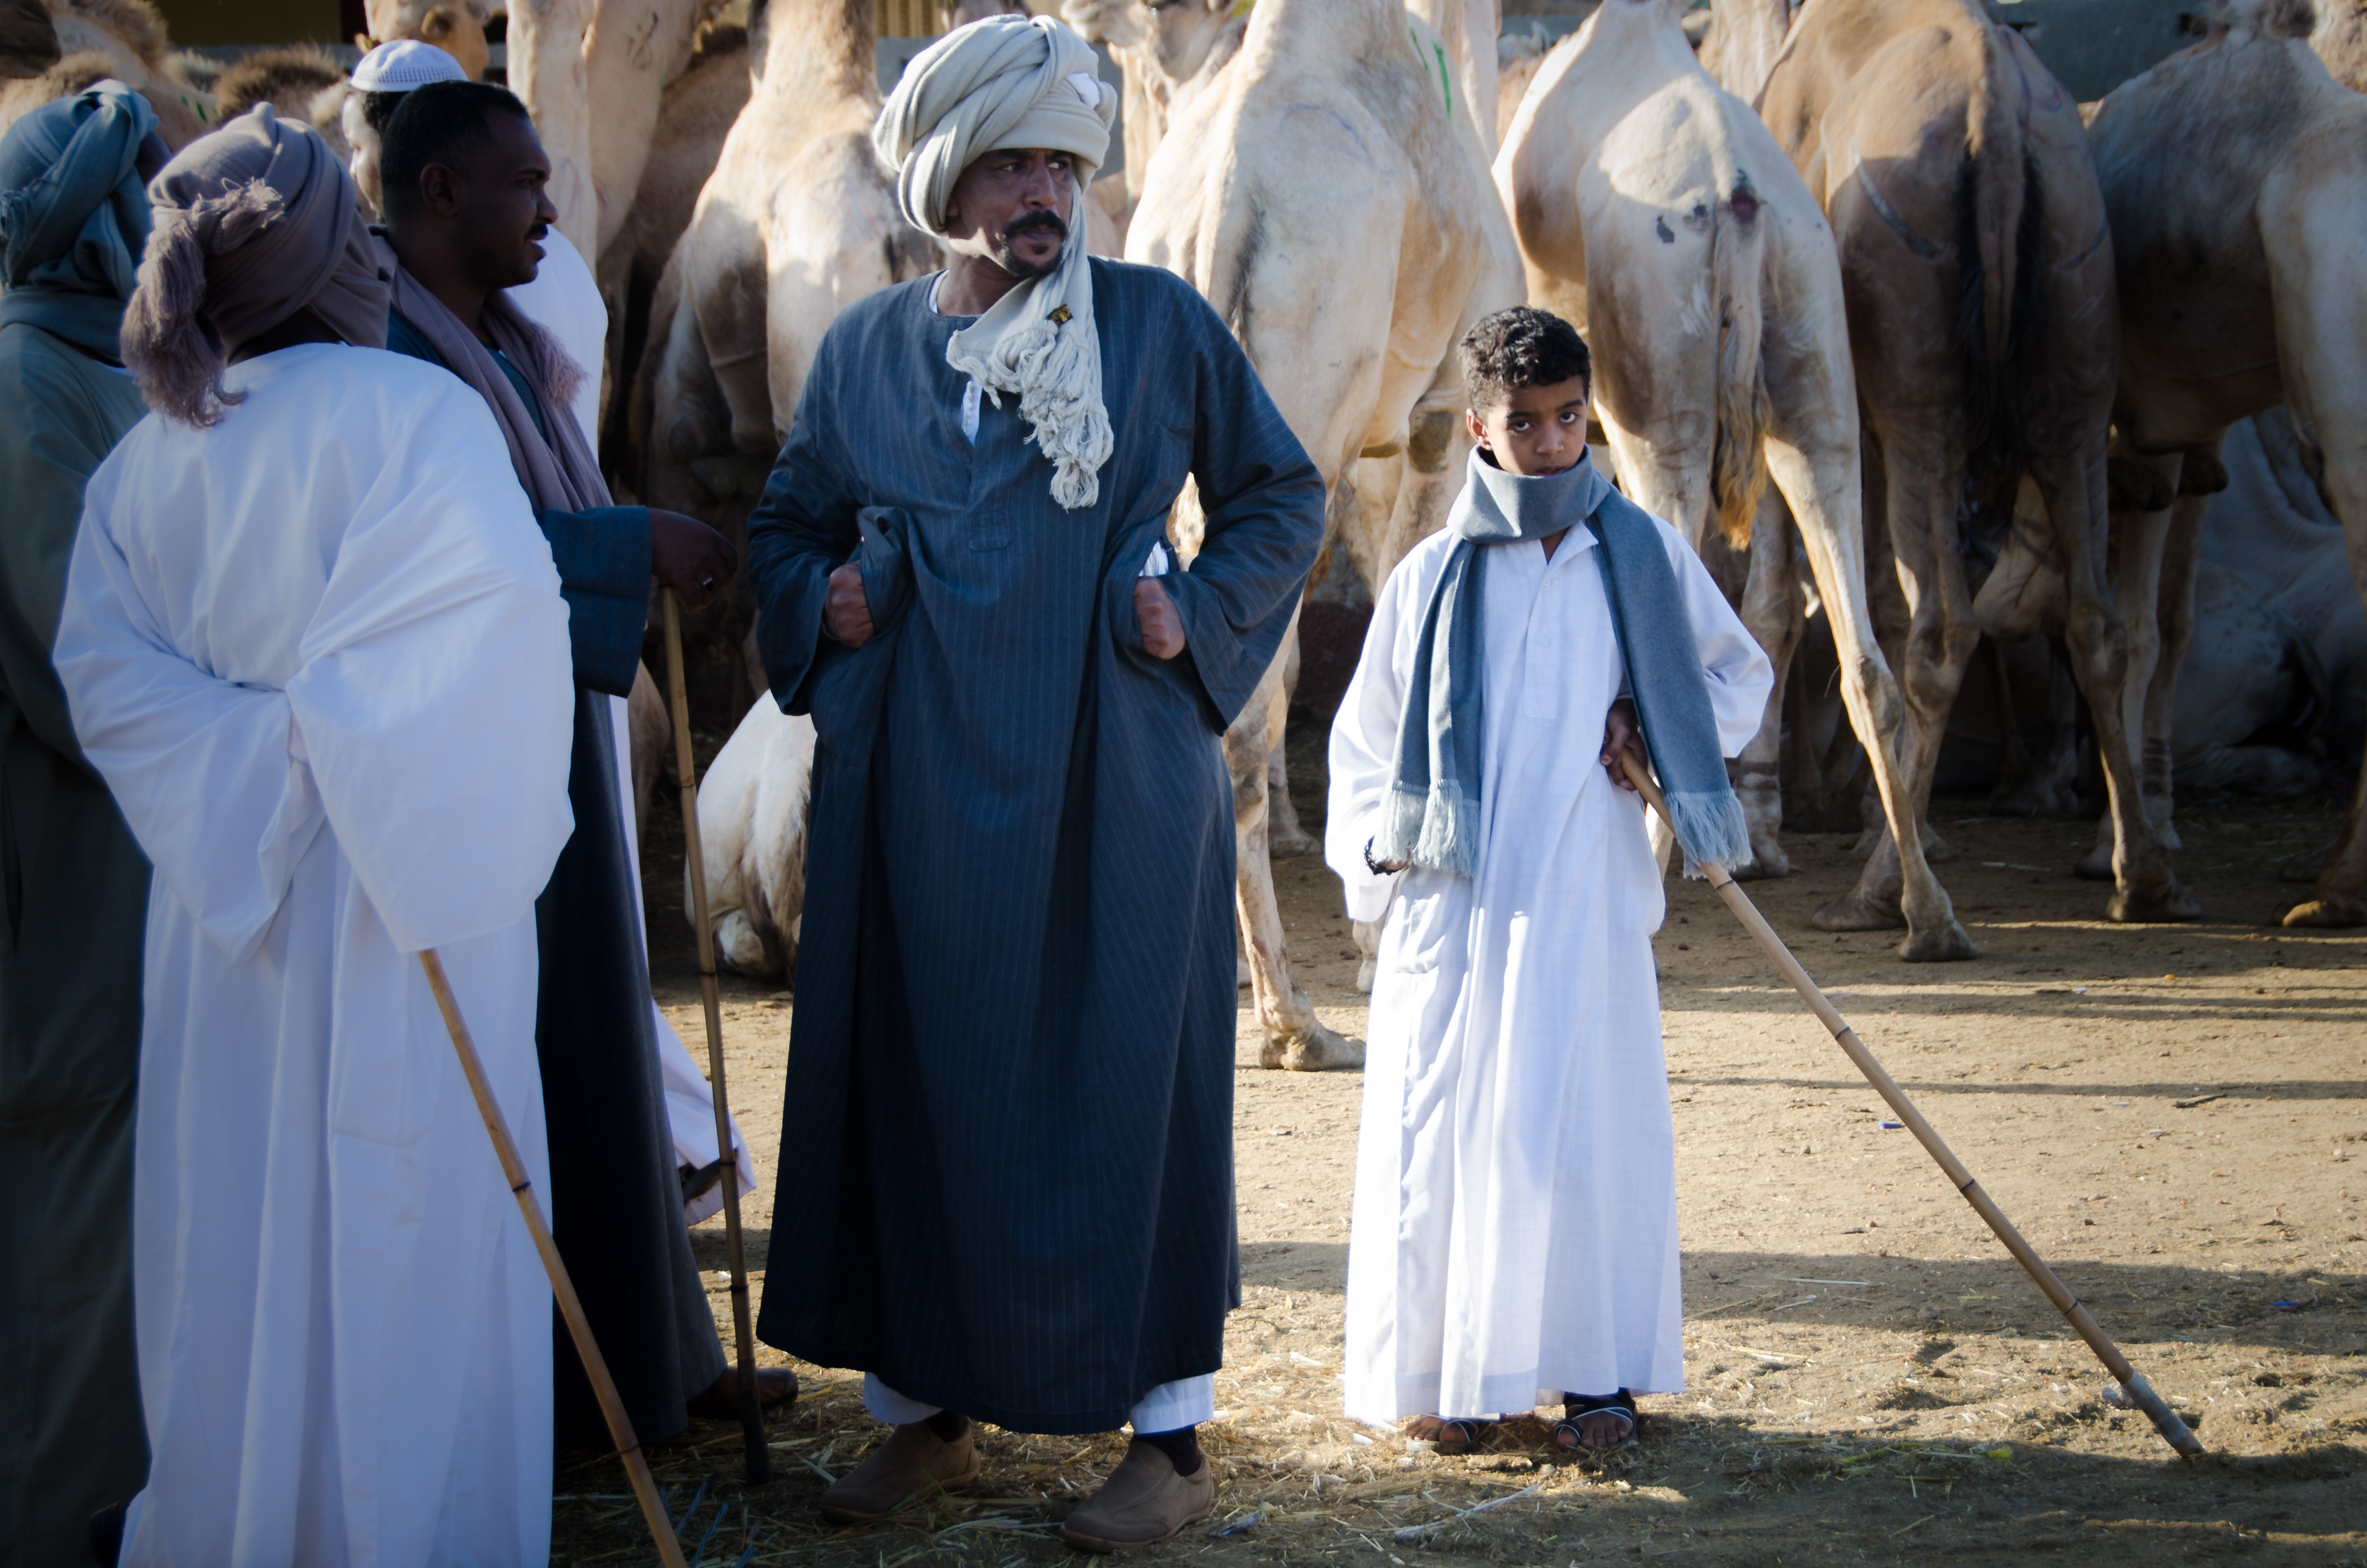 The boys learn from their fathers, uncles and brothers from an early age. While learning the traditional camel trade in a chaotic, gritty, environment , they also form a sense of identity: what it means to be a man.